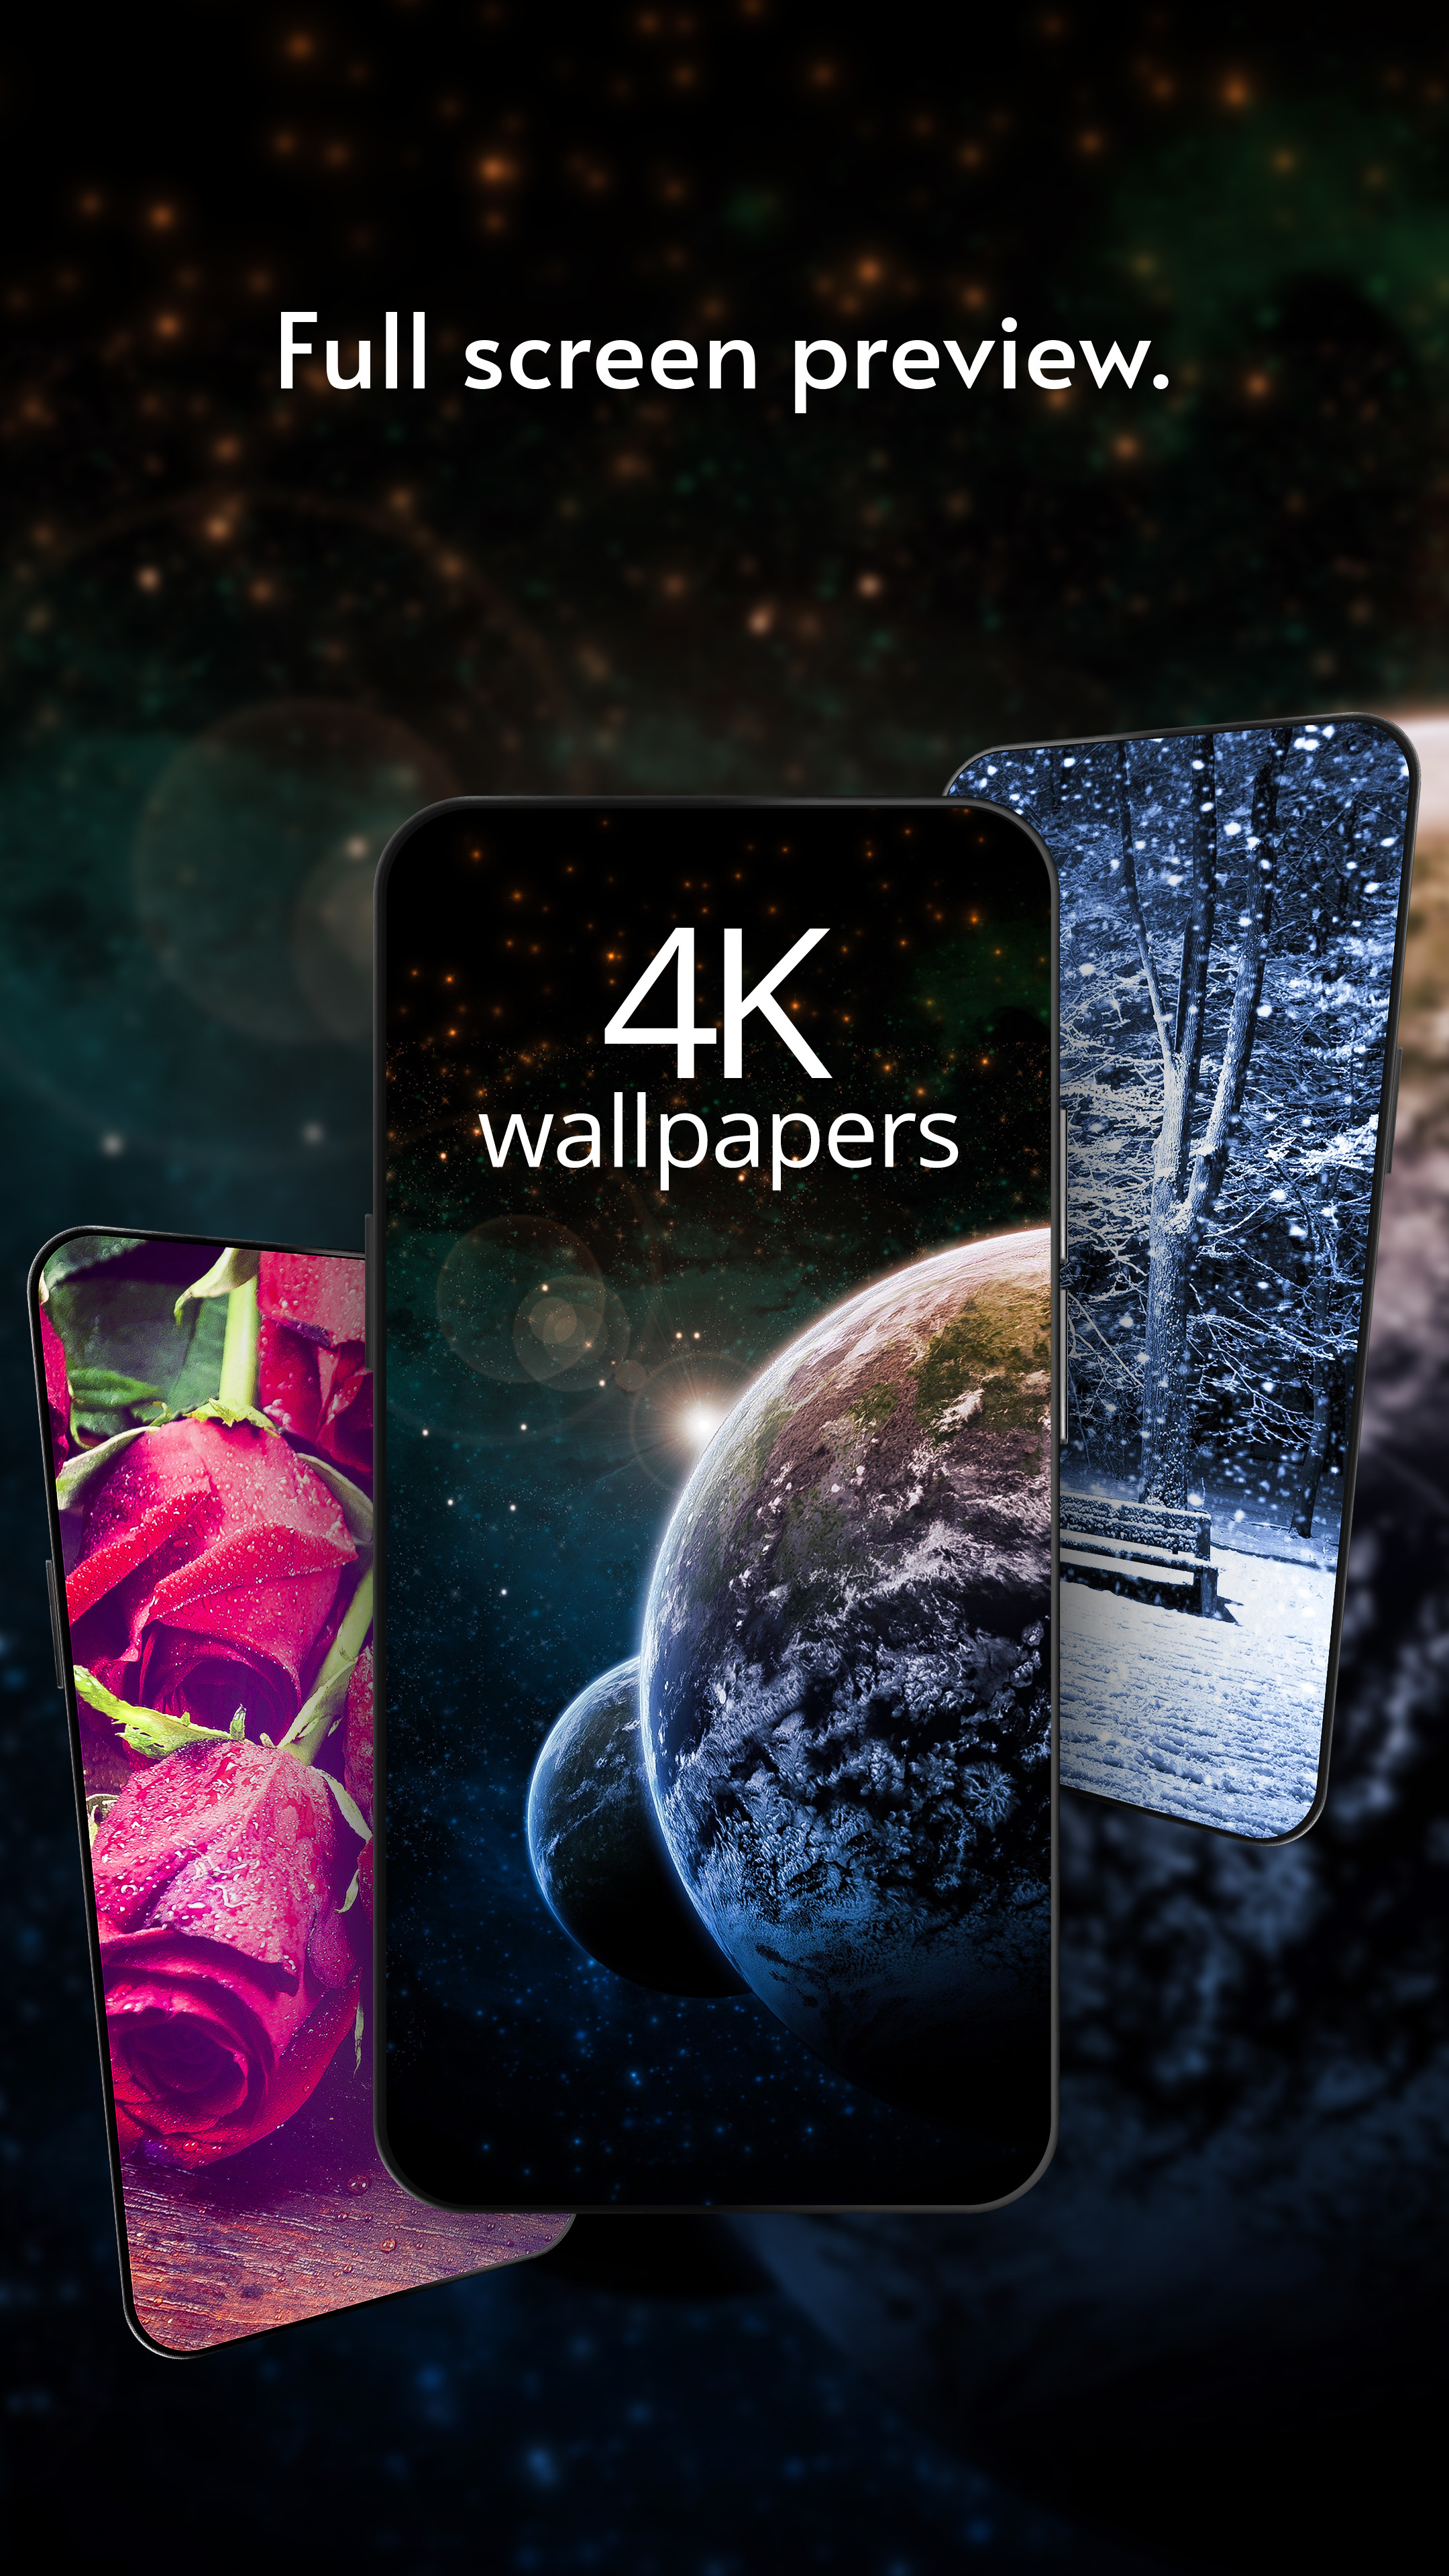 Beautiful wallpapers k apk for android â download beautiful wallpapers k apk latest version from